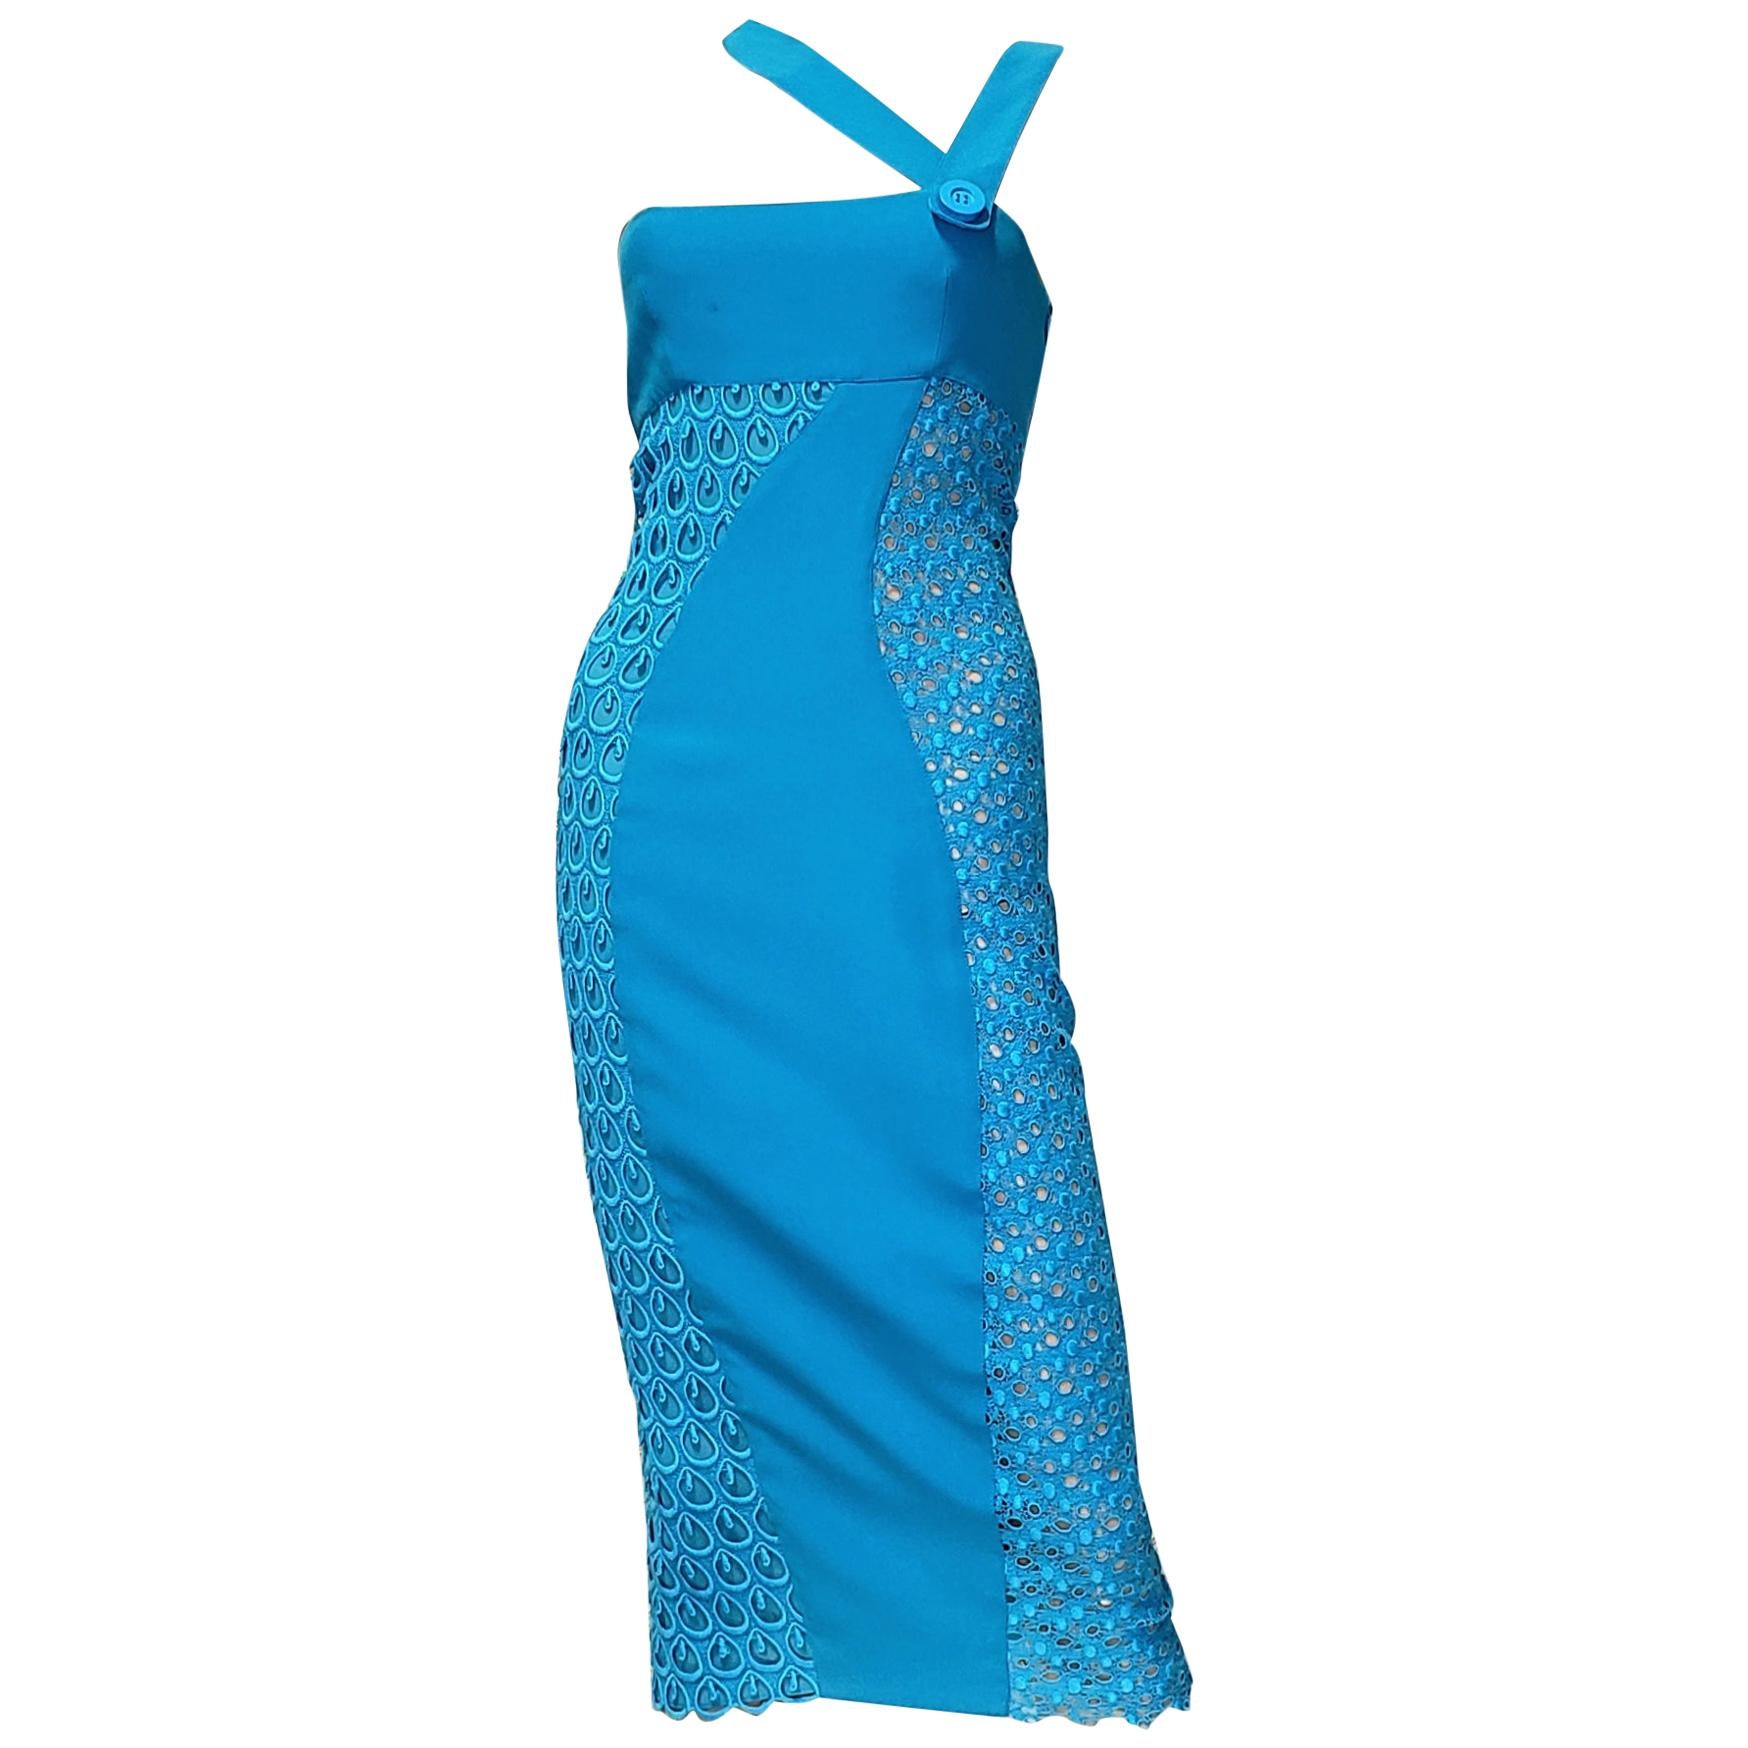 S/S 2011 look # 34 NEW VERSACE BLUE SILK EMBROIDERED Dress 38 - 2